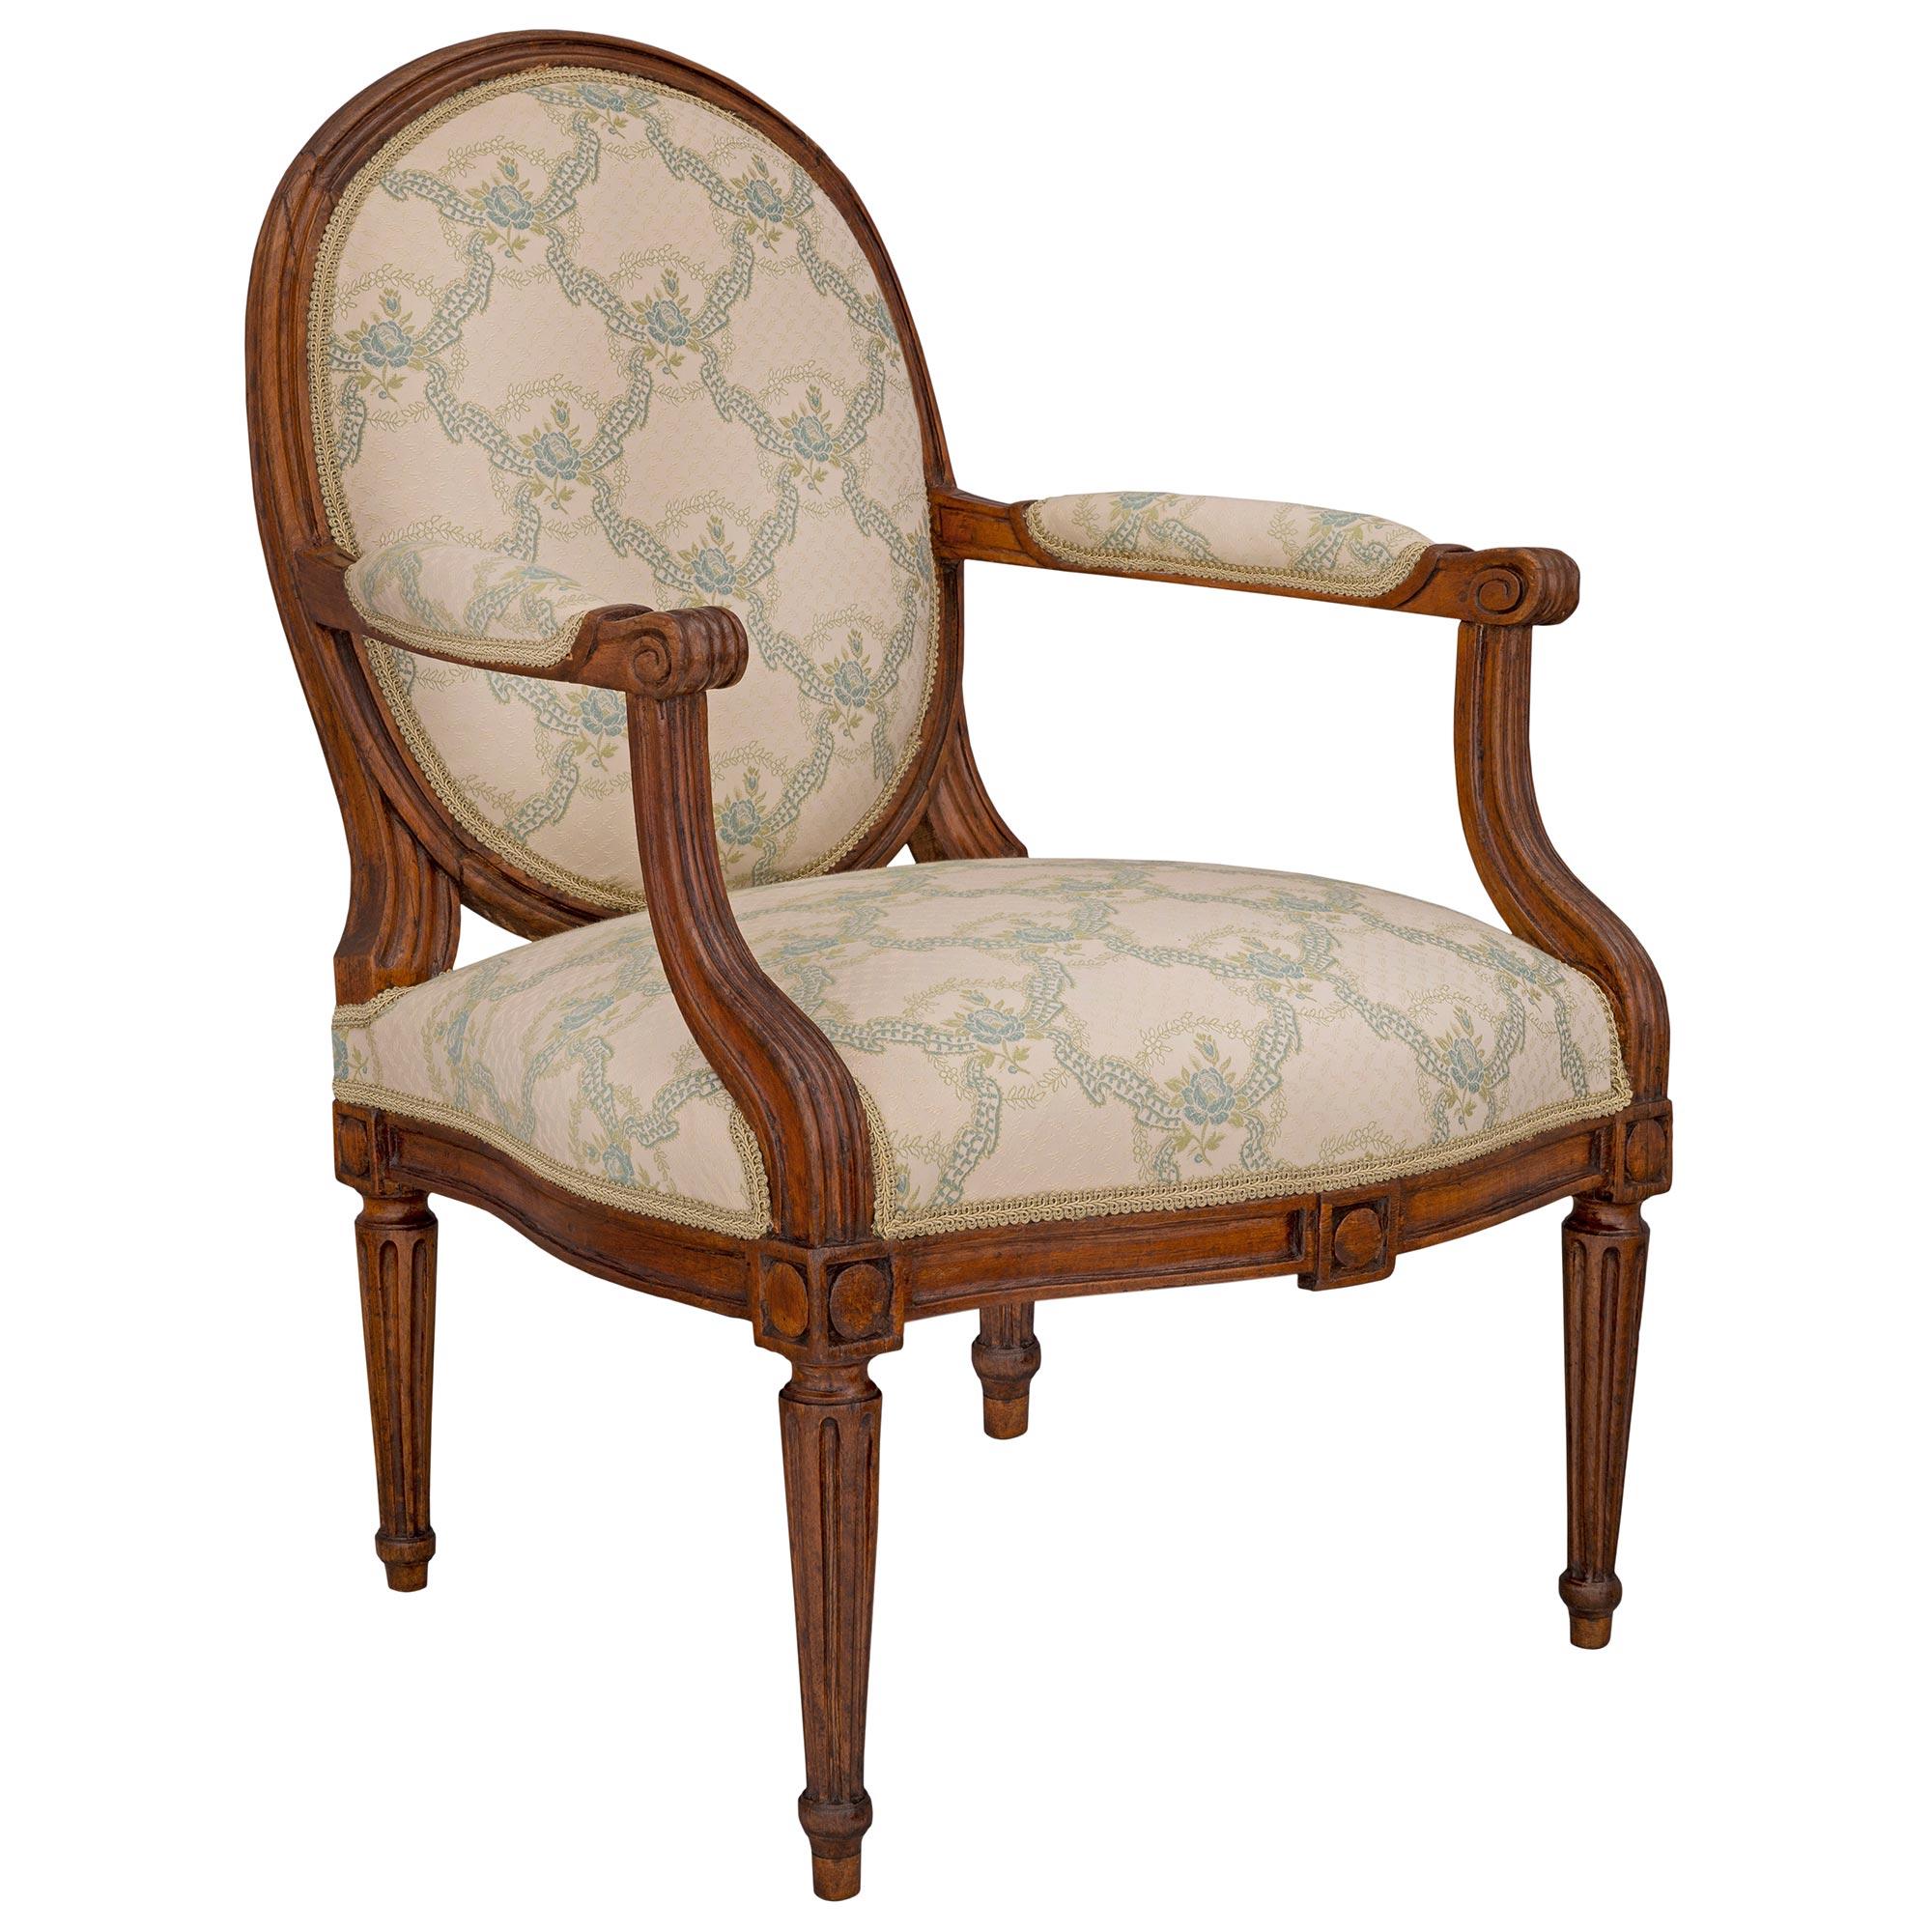 A very attractive French 18th century Louis XVI period walnut armchair, circa 1760. The low seating armchair is raised by elegant circular tapered fluted legs with finely carved block reserves above each leg and at the center of the straight frieze.